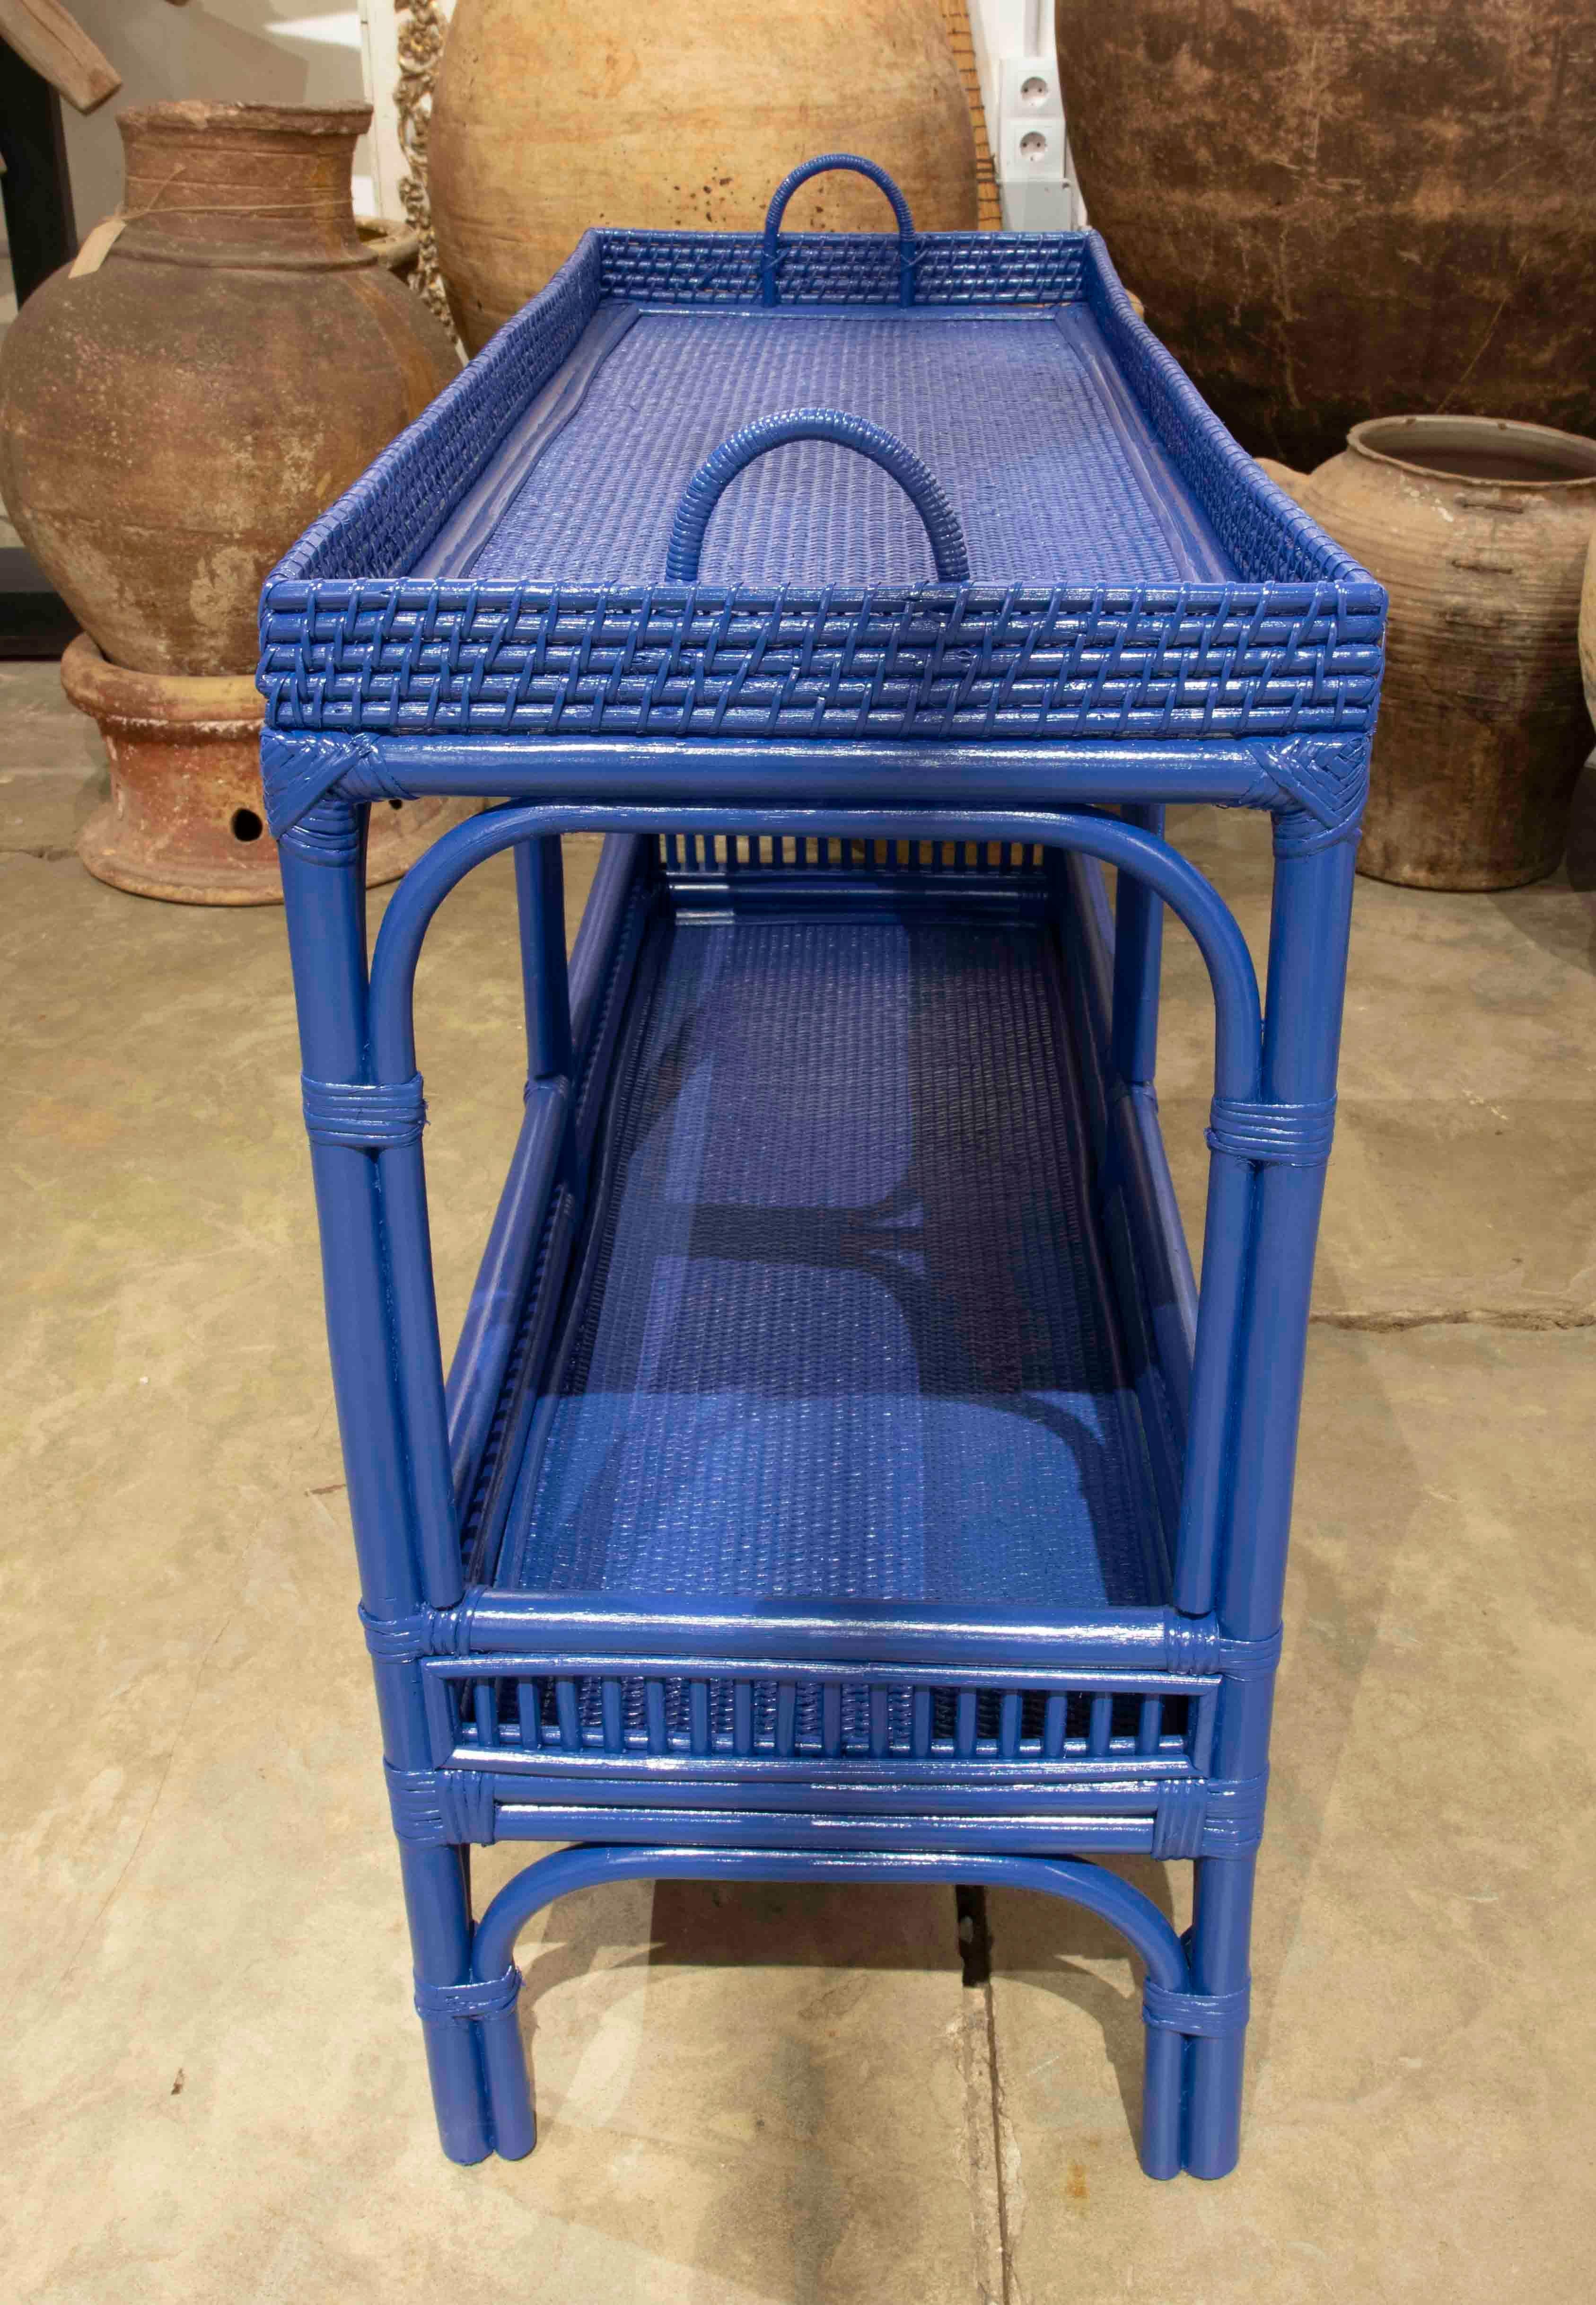 20th Century Rattan and Wicker Shelving Unit with Two Bar Shelves Painted in Blue